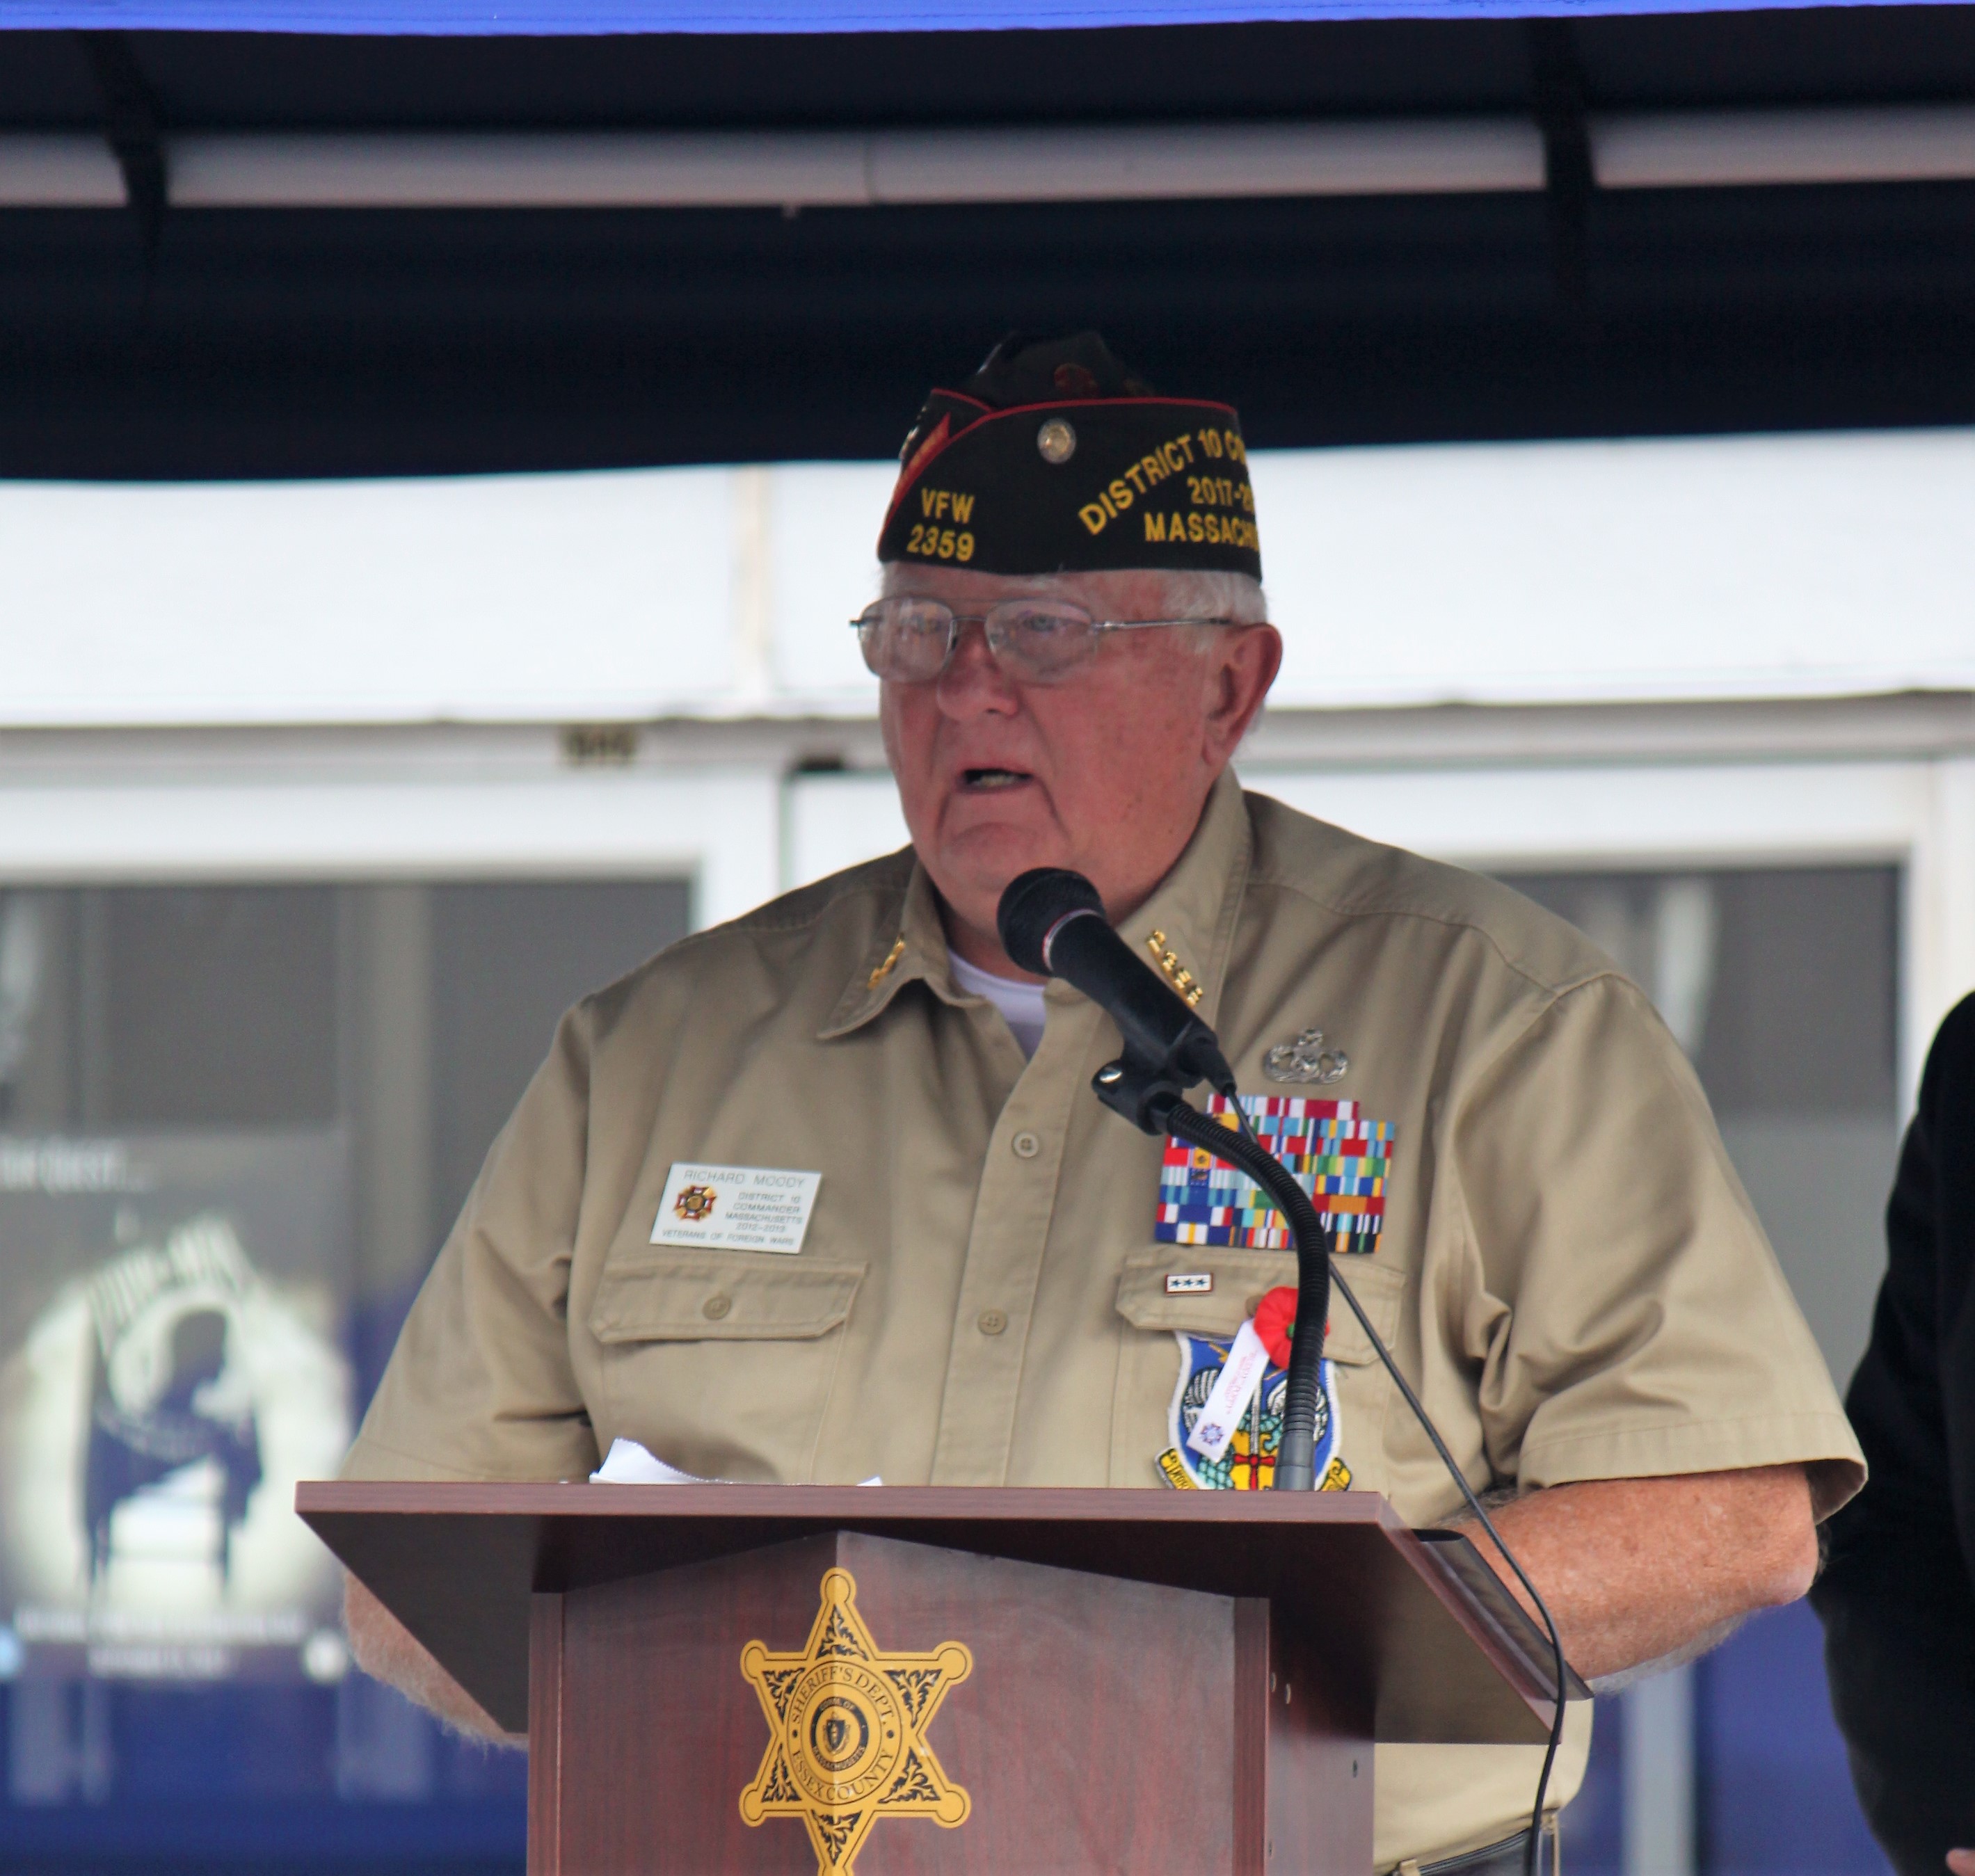 Essex County Sheriff’s Dept Pays Tribute to MIA/ POW’s on National Recognition Day